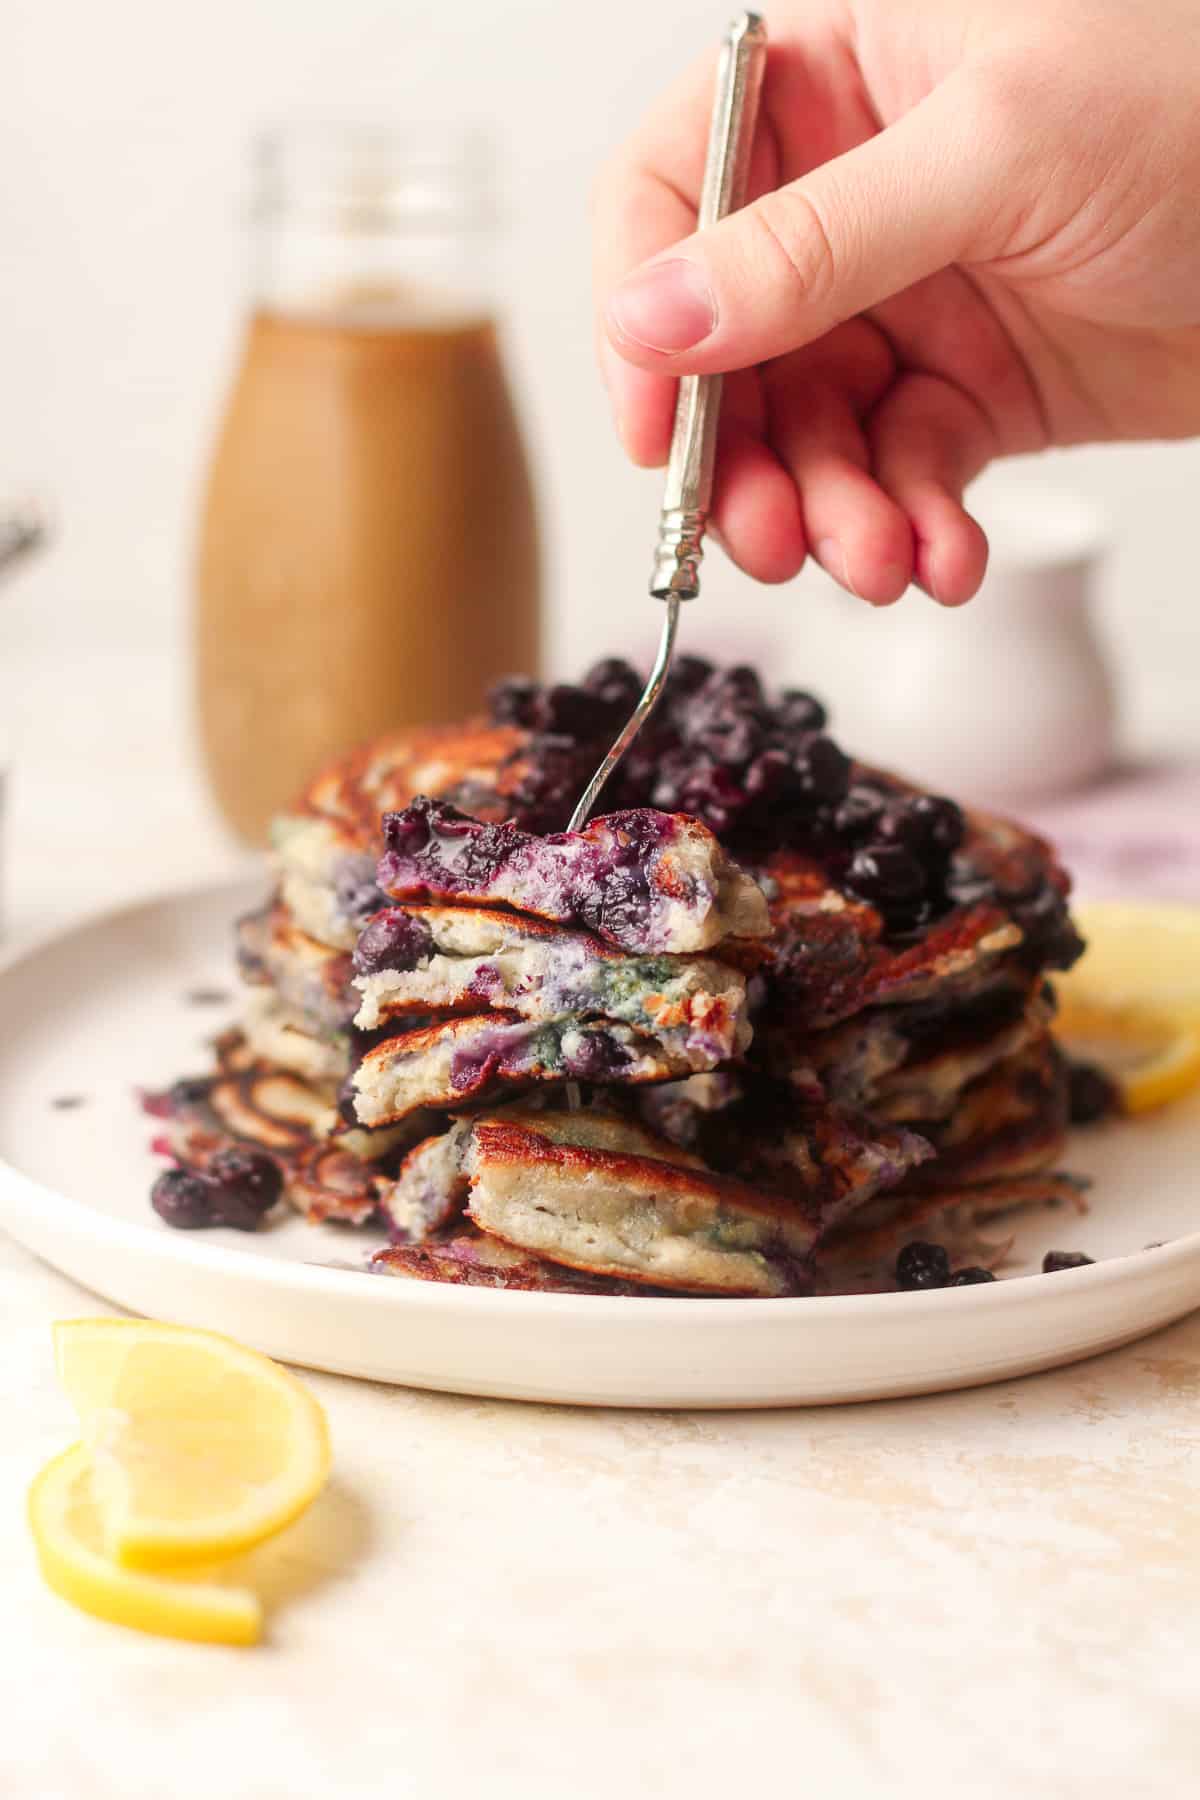 A hand digging a fork into a stack of blueberry pancakes.